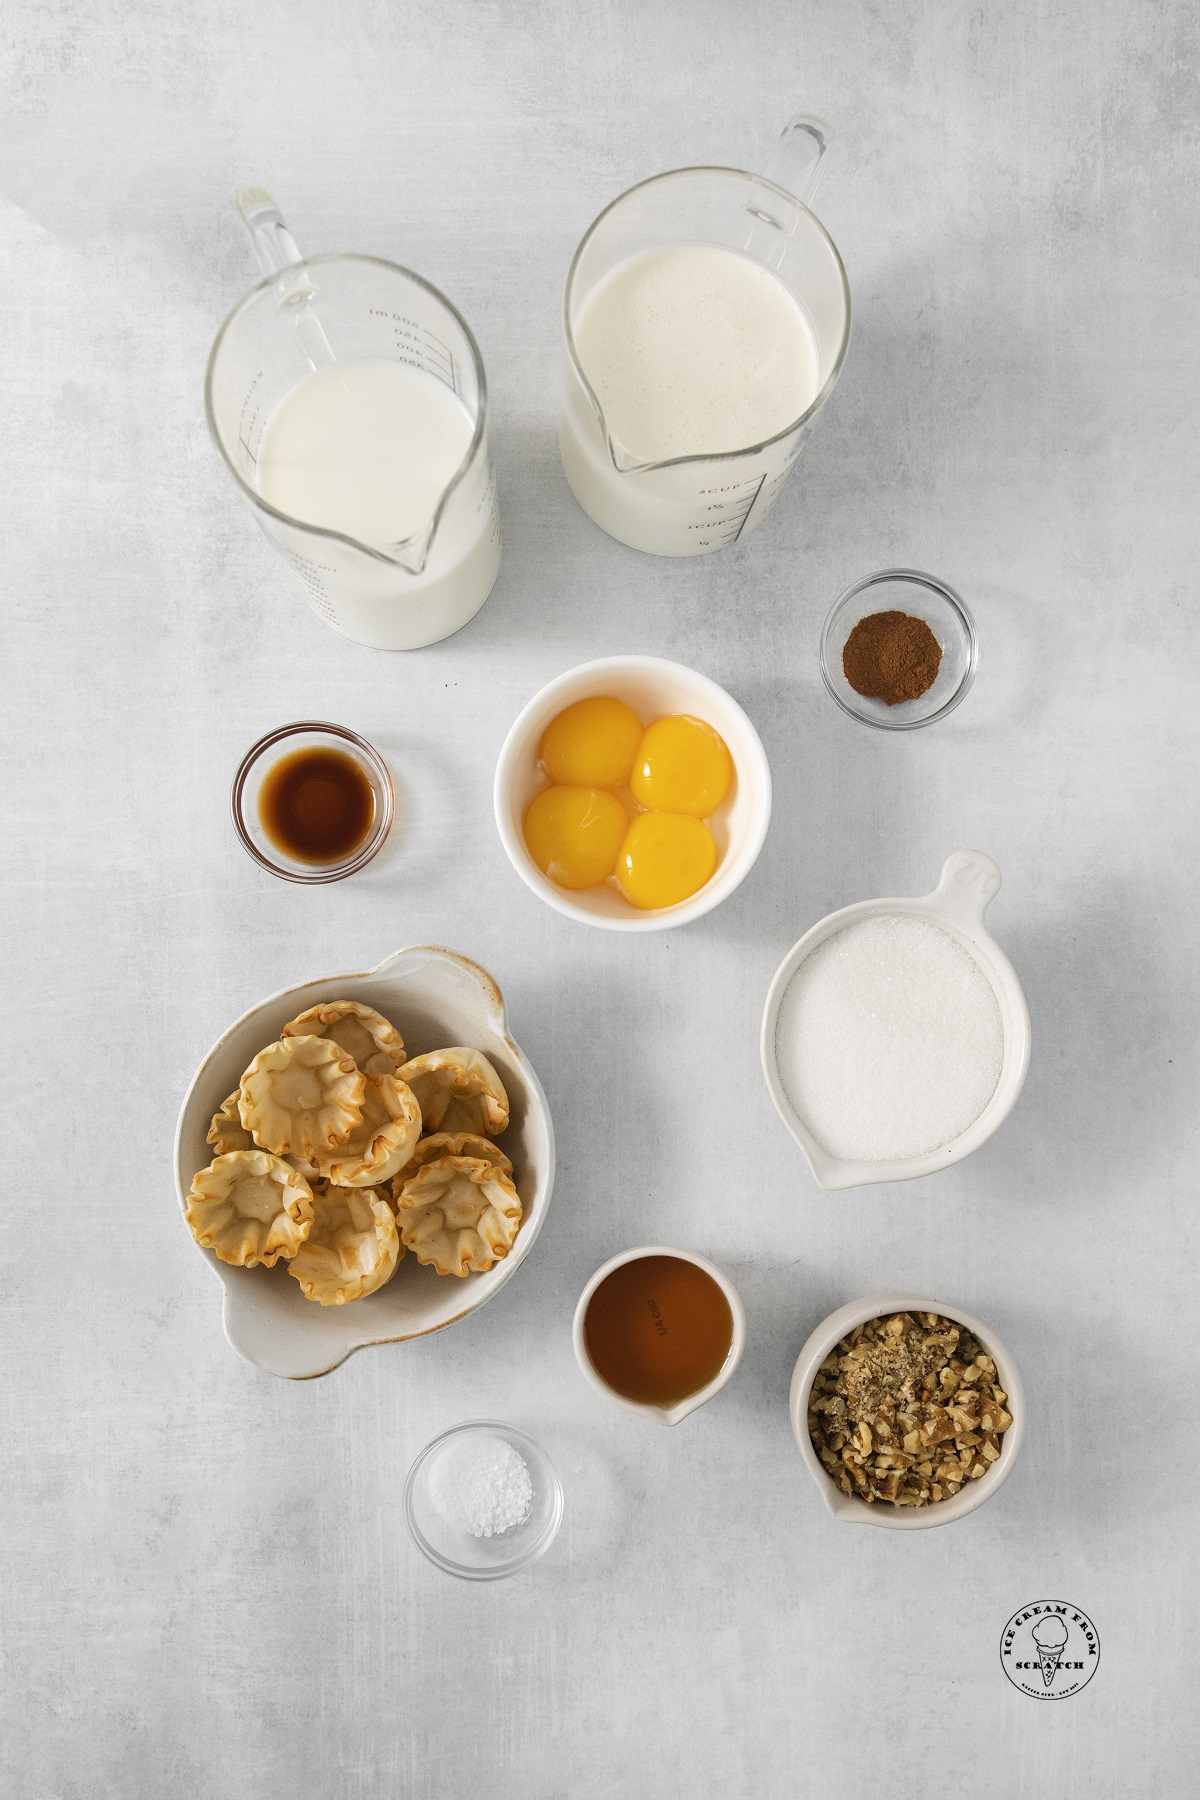 the ingredients needed to make homemade baklava ice cream, including nuts and pastry shells, all measured into separate bowls and arranged on a counter.